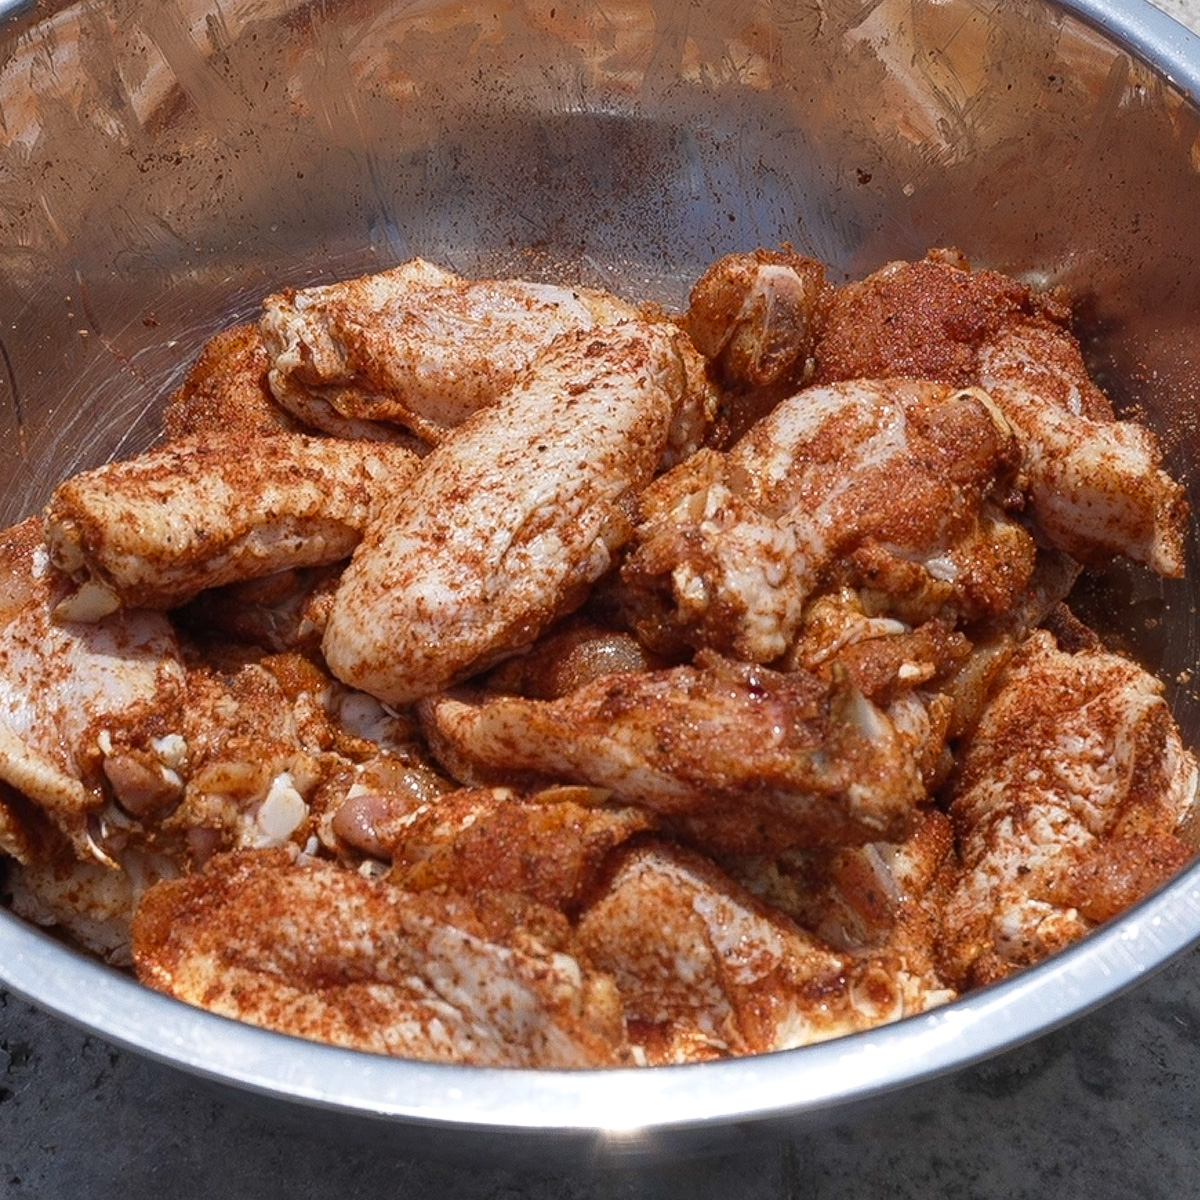 Rinse the wings and apply a dry rub.